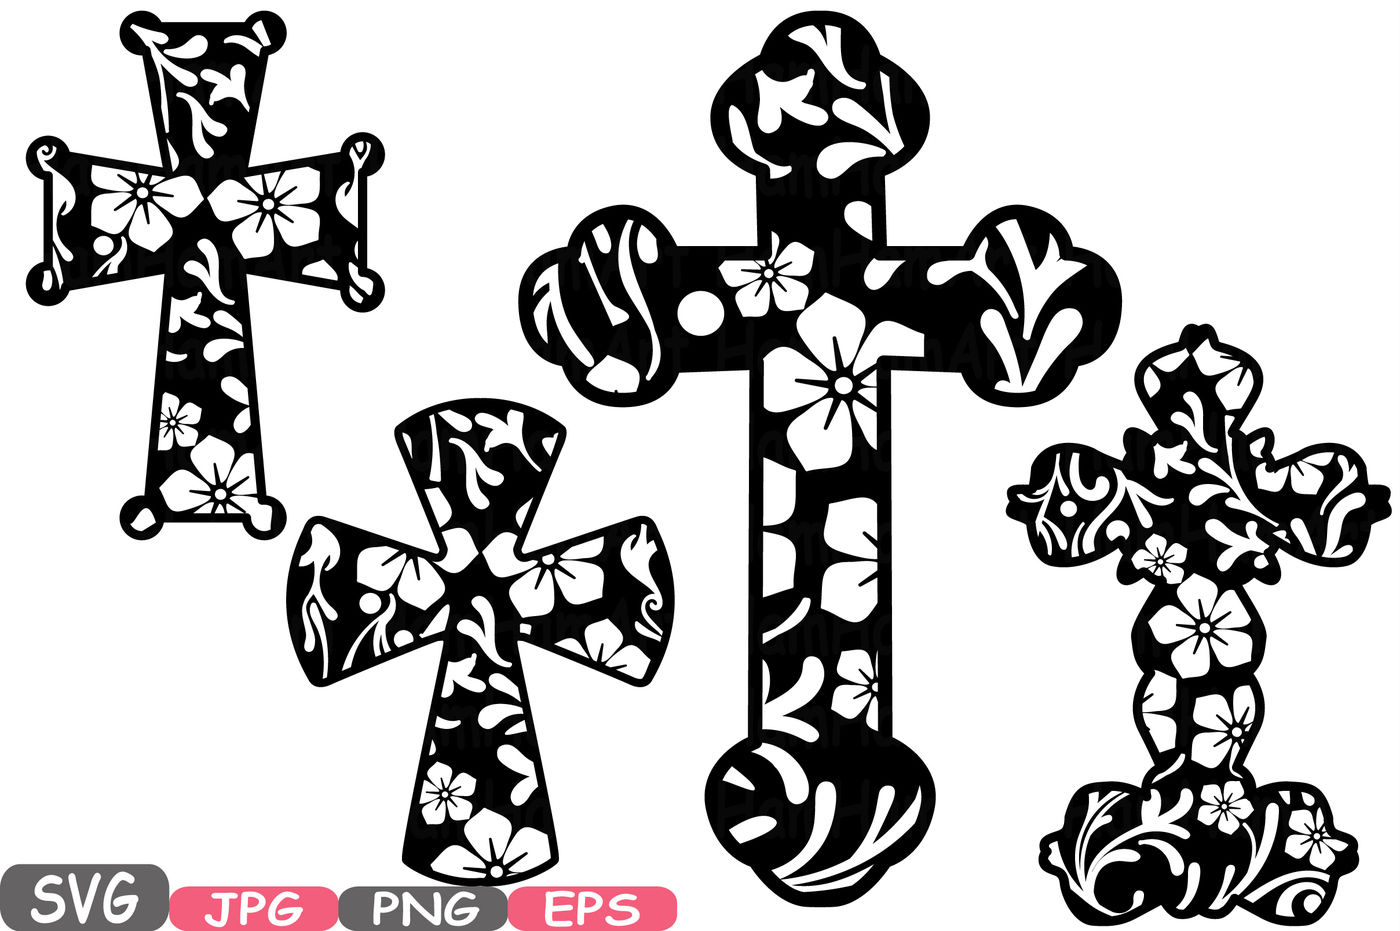 Download Christmas Cross Svg - SVG File | Download Free and Premium SVG